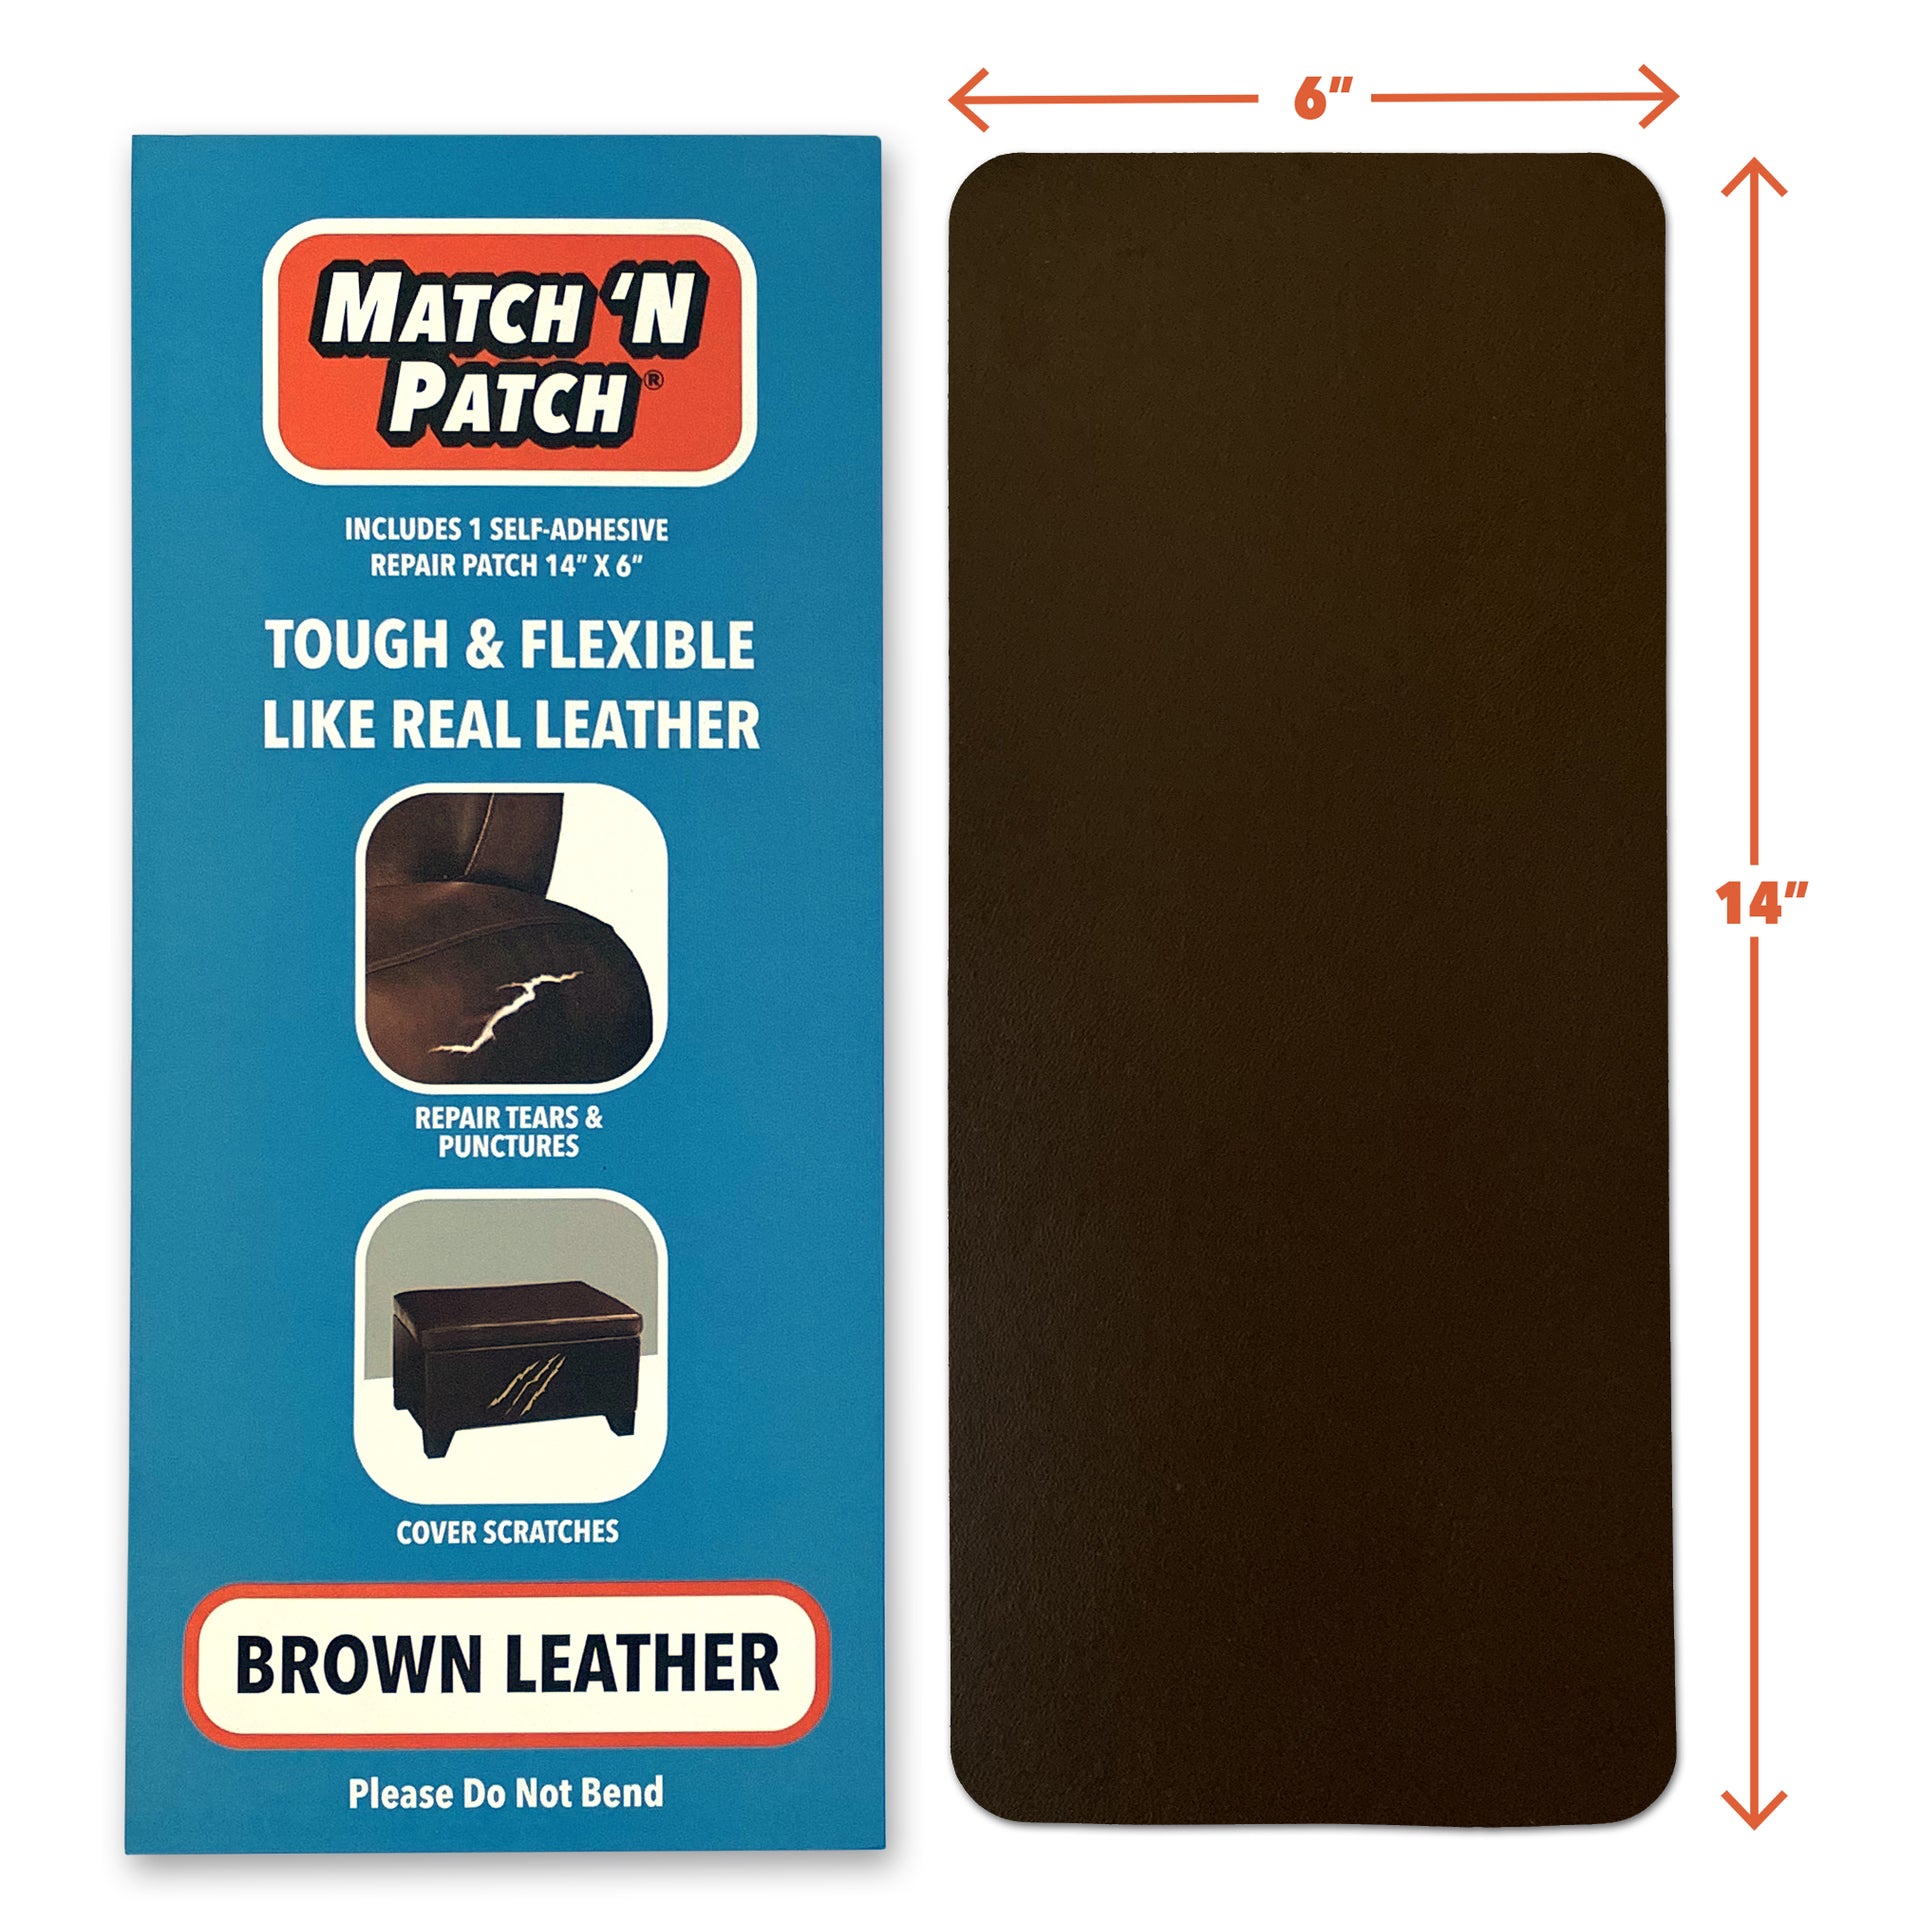 Self-adhesive leather patch - Dark brown - dimensions 16 cm x 10 cm 